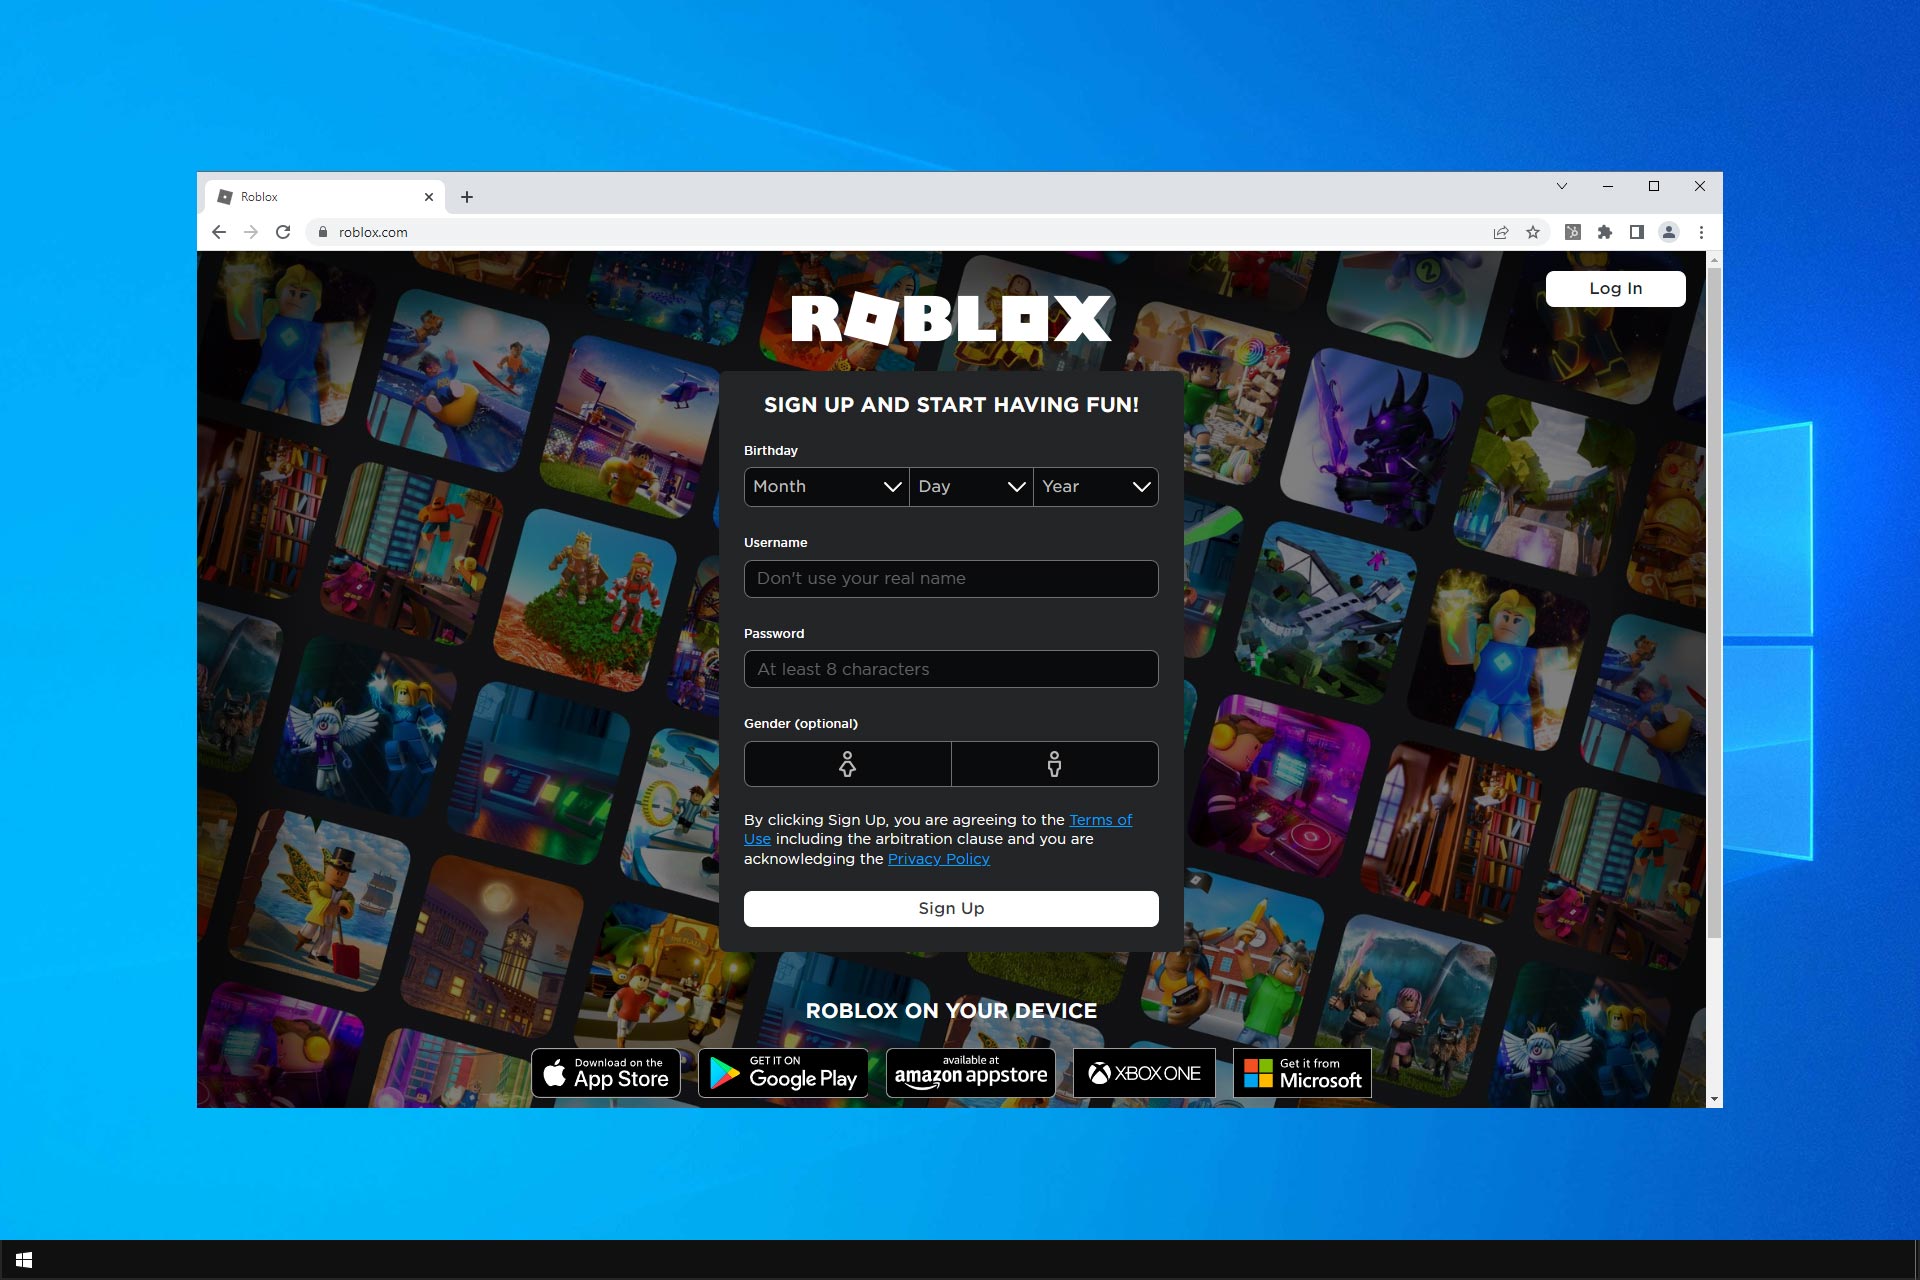 Roblox Not Working on Google Chrome: Why & How to Get it Work